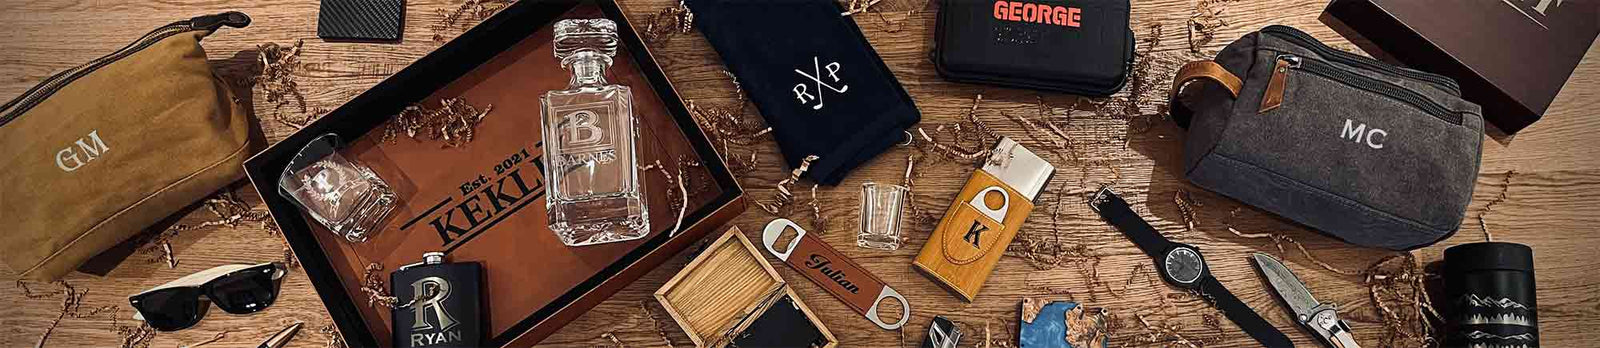 37 Awesome 30th Birthday Gift Ideas for Him